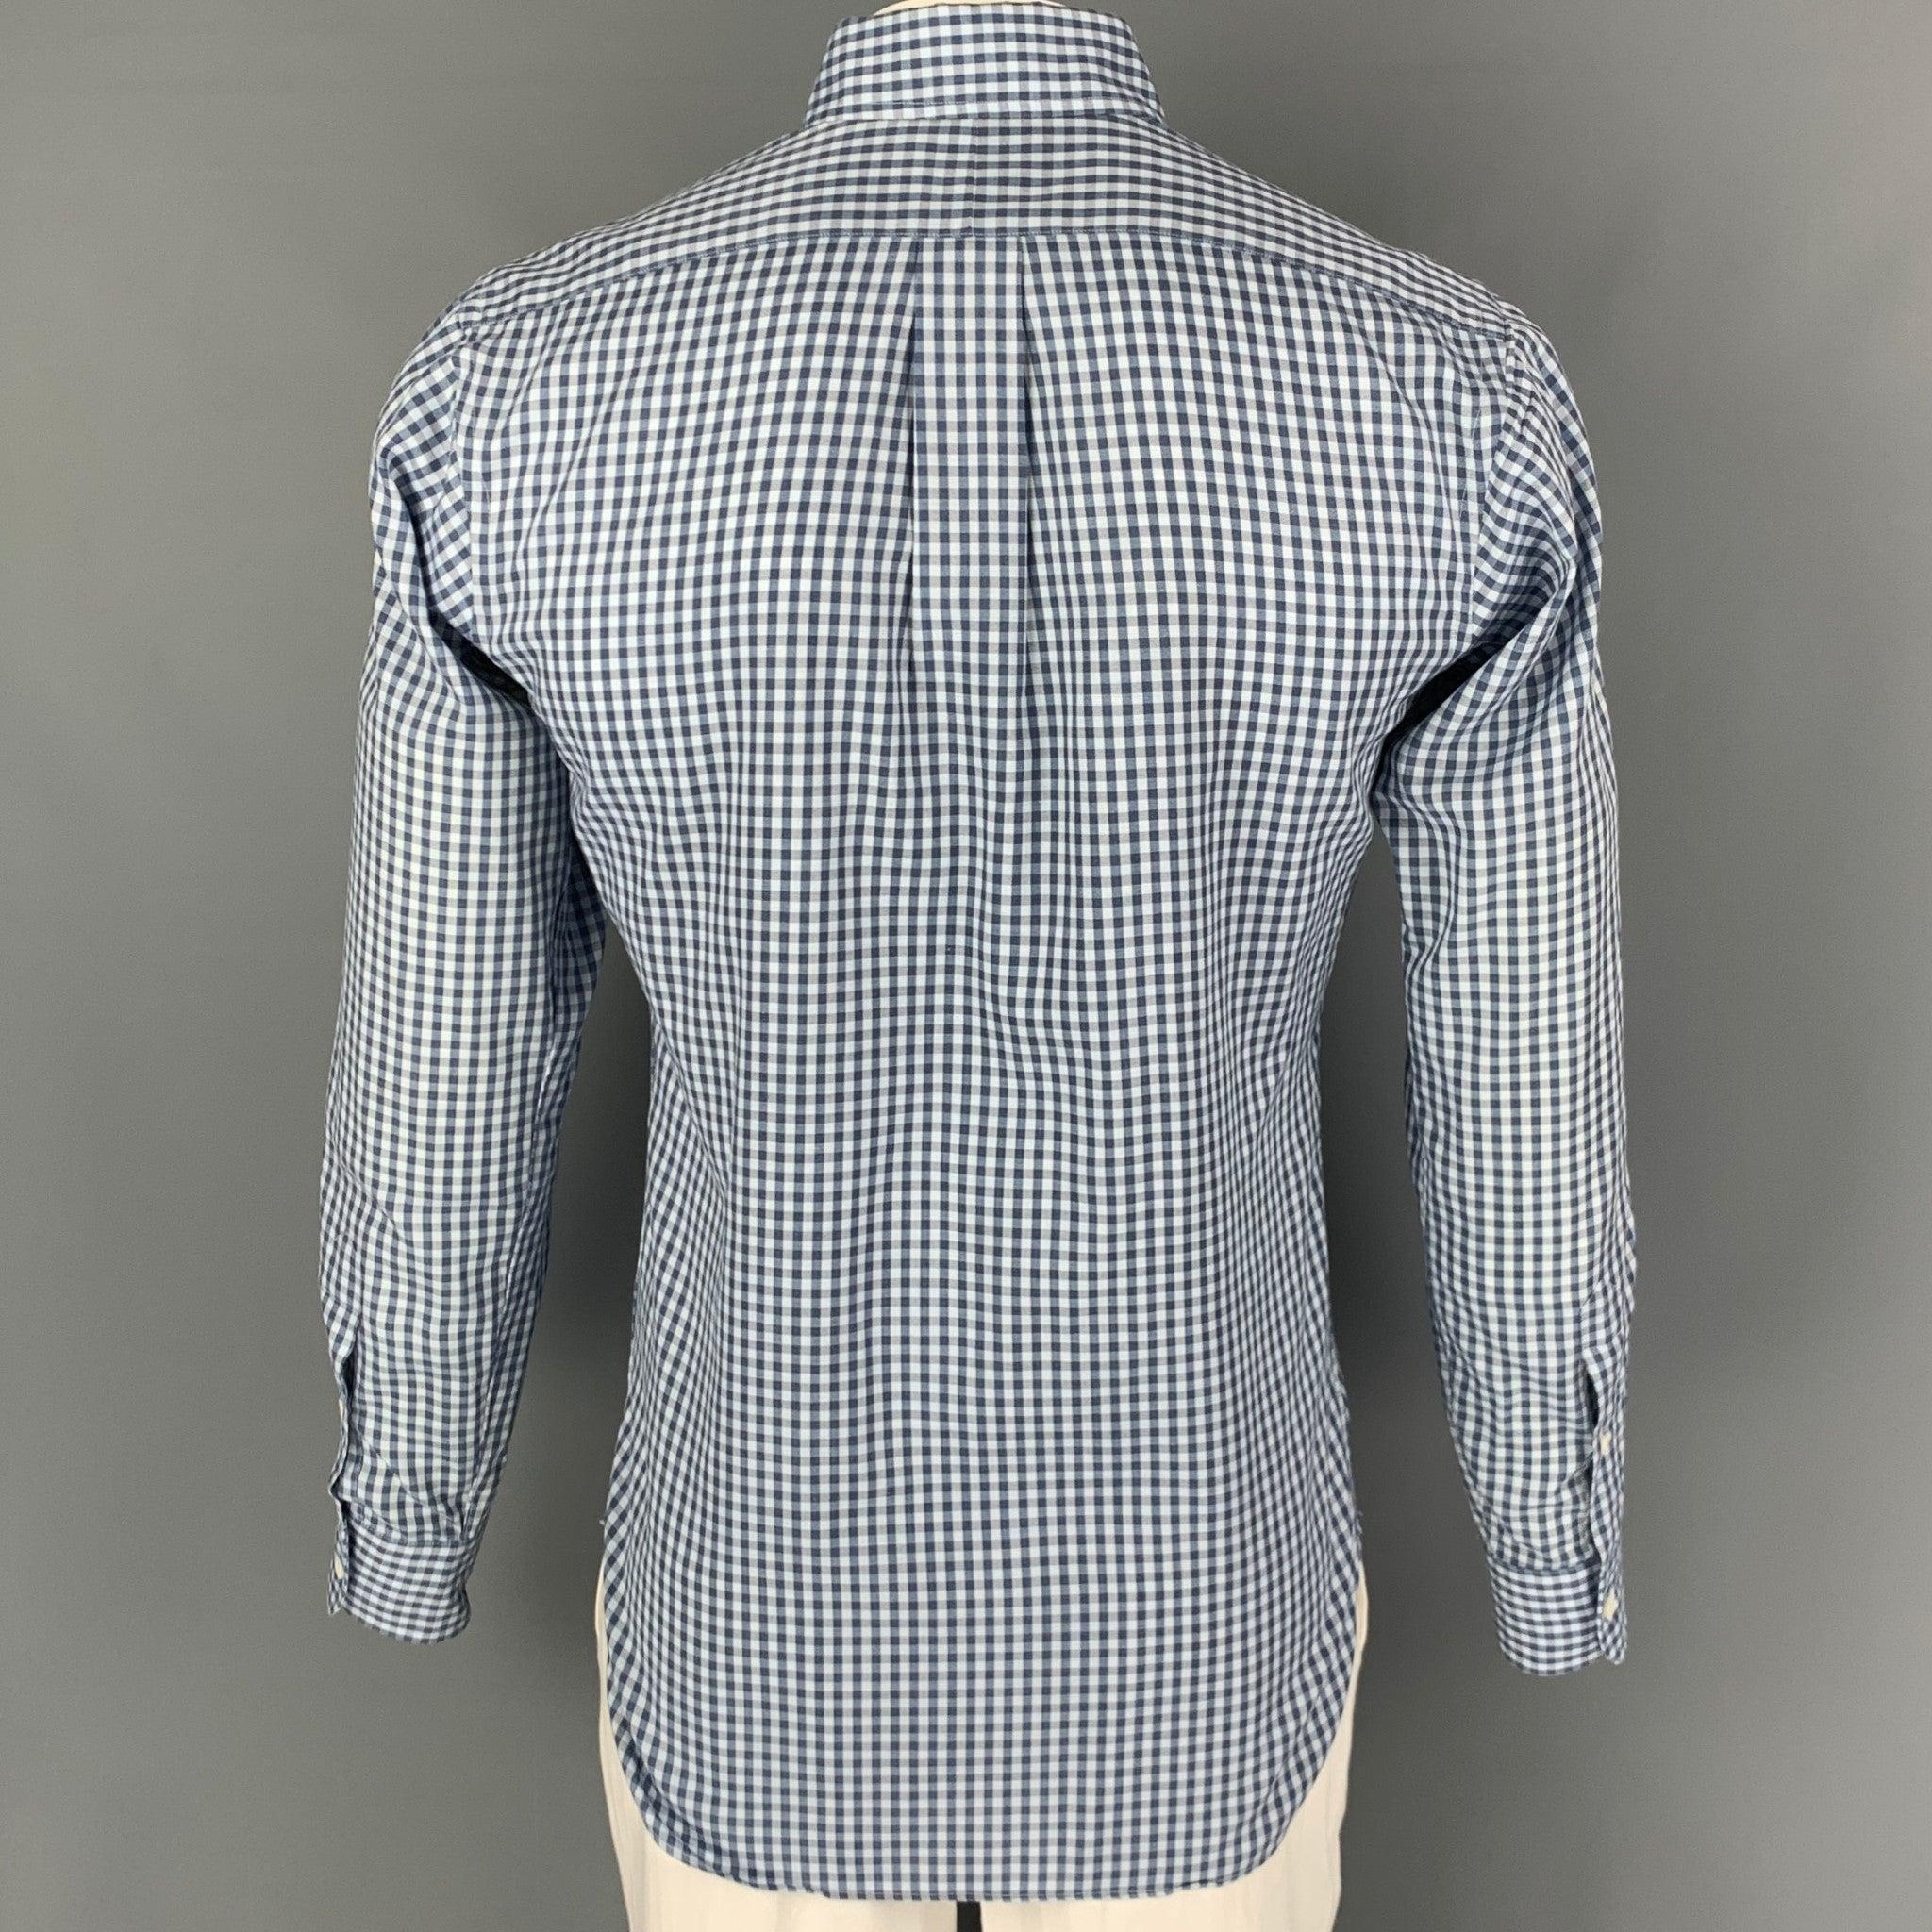 HAMILTON Size L Blue & Light Blue Gingham Long Sleeve Shirt In Good Condition For Sale In San Francisco, CA